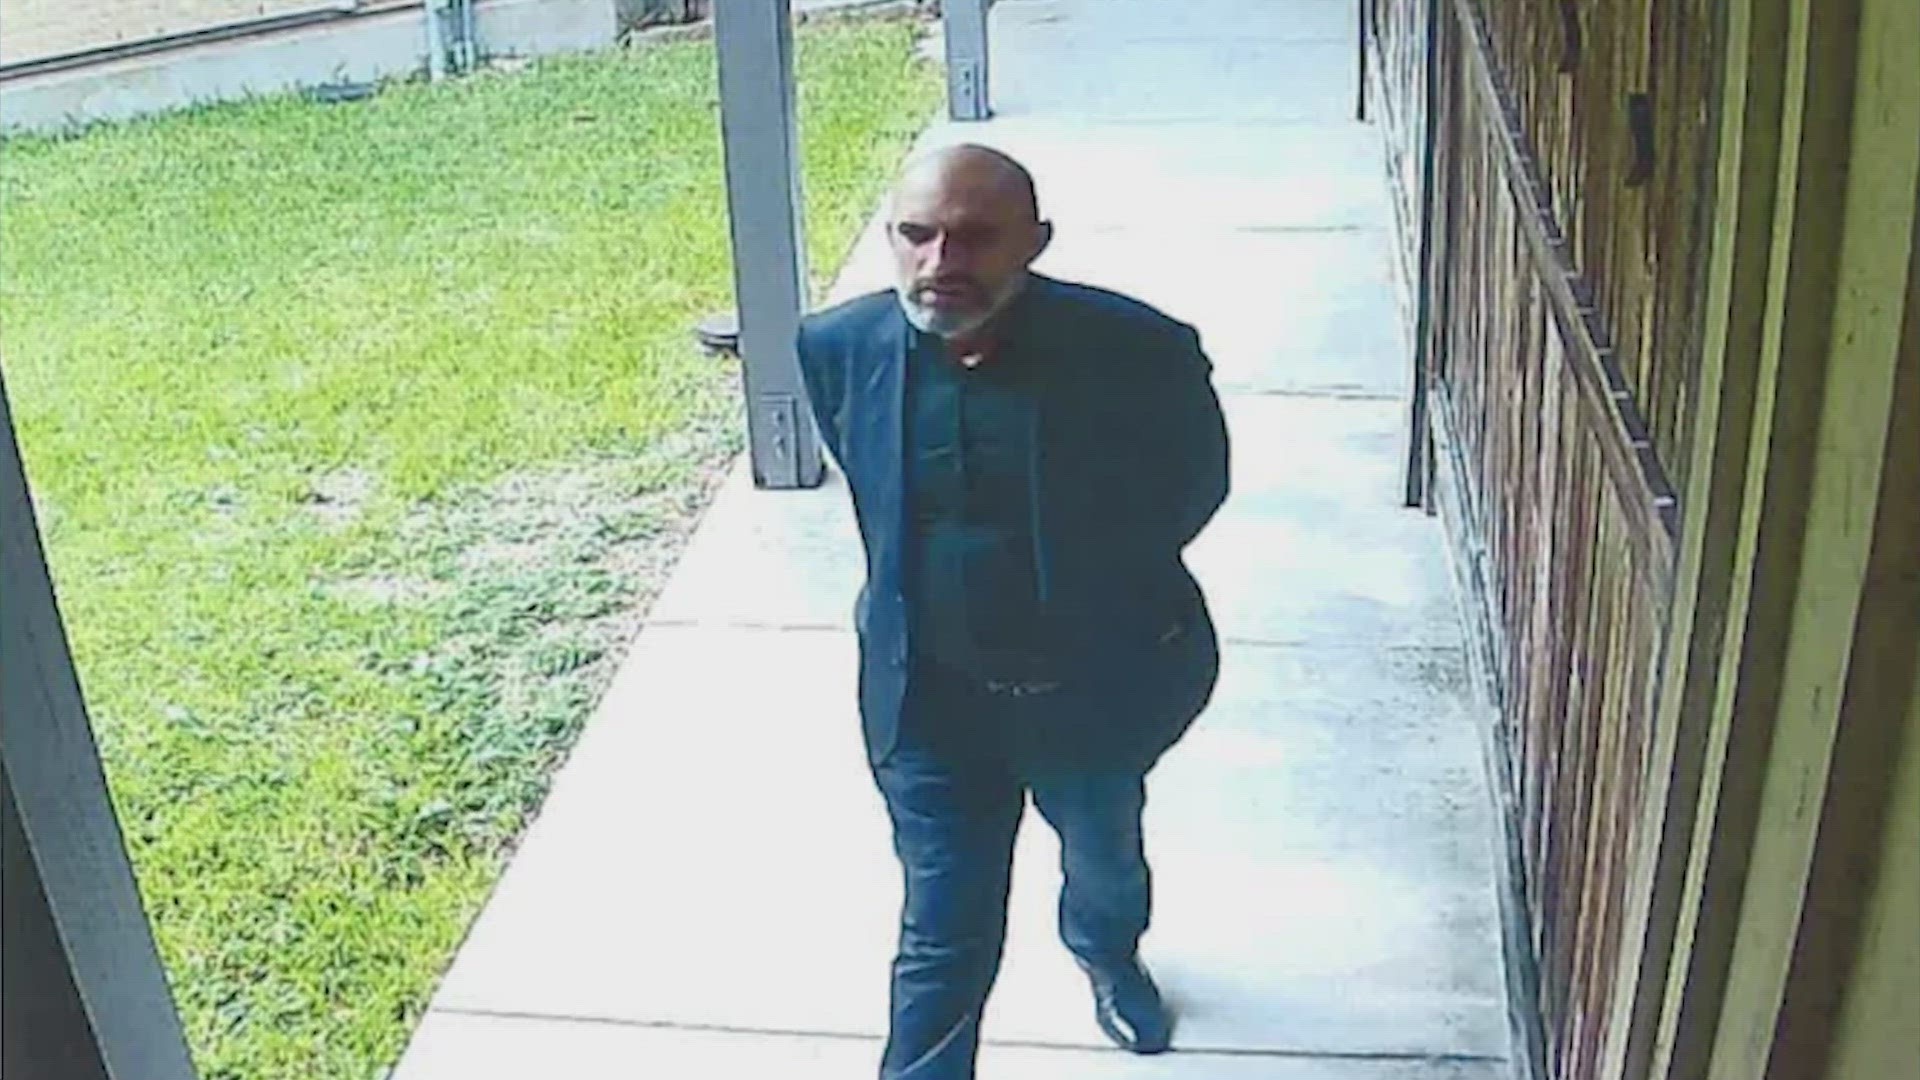 According to a memo sent by the Archdiocese of Galveston-Houston, a man going by "Father Martin" is getting access to and stealing from Catholic churches.